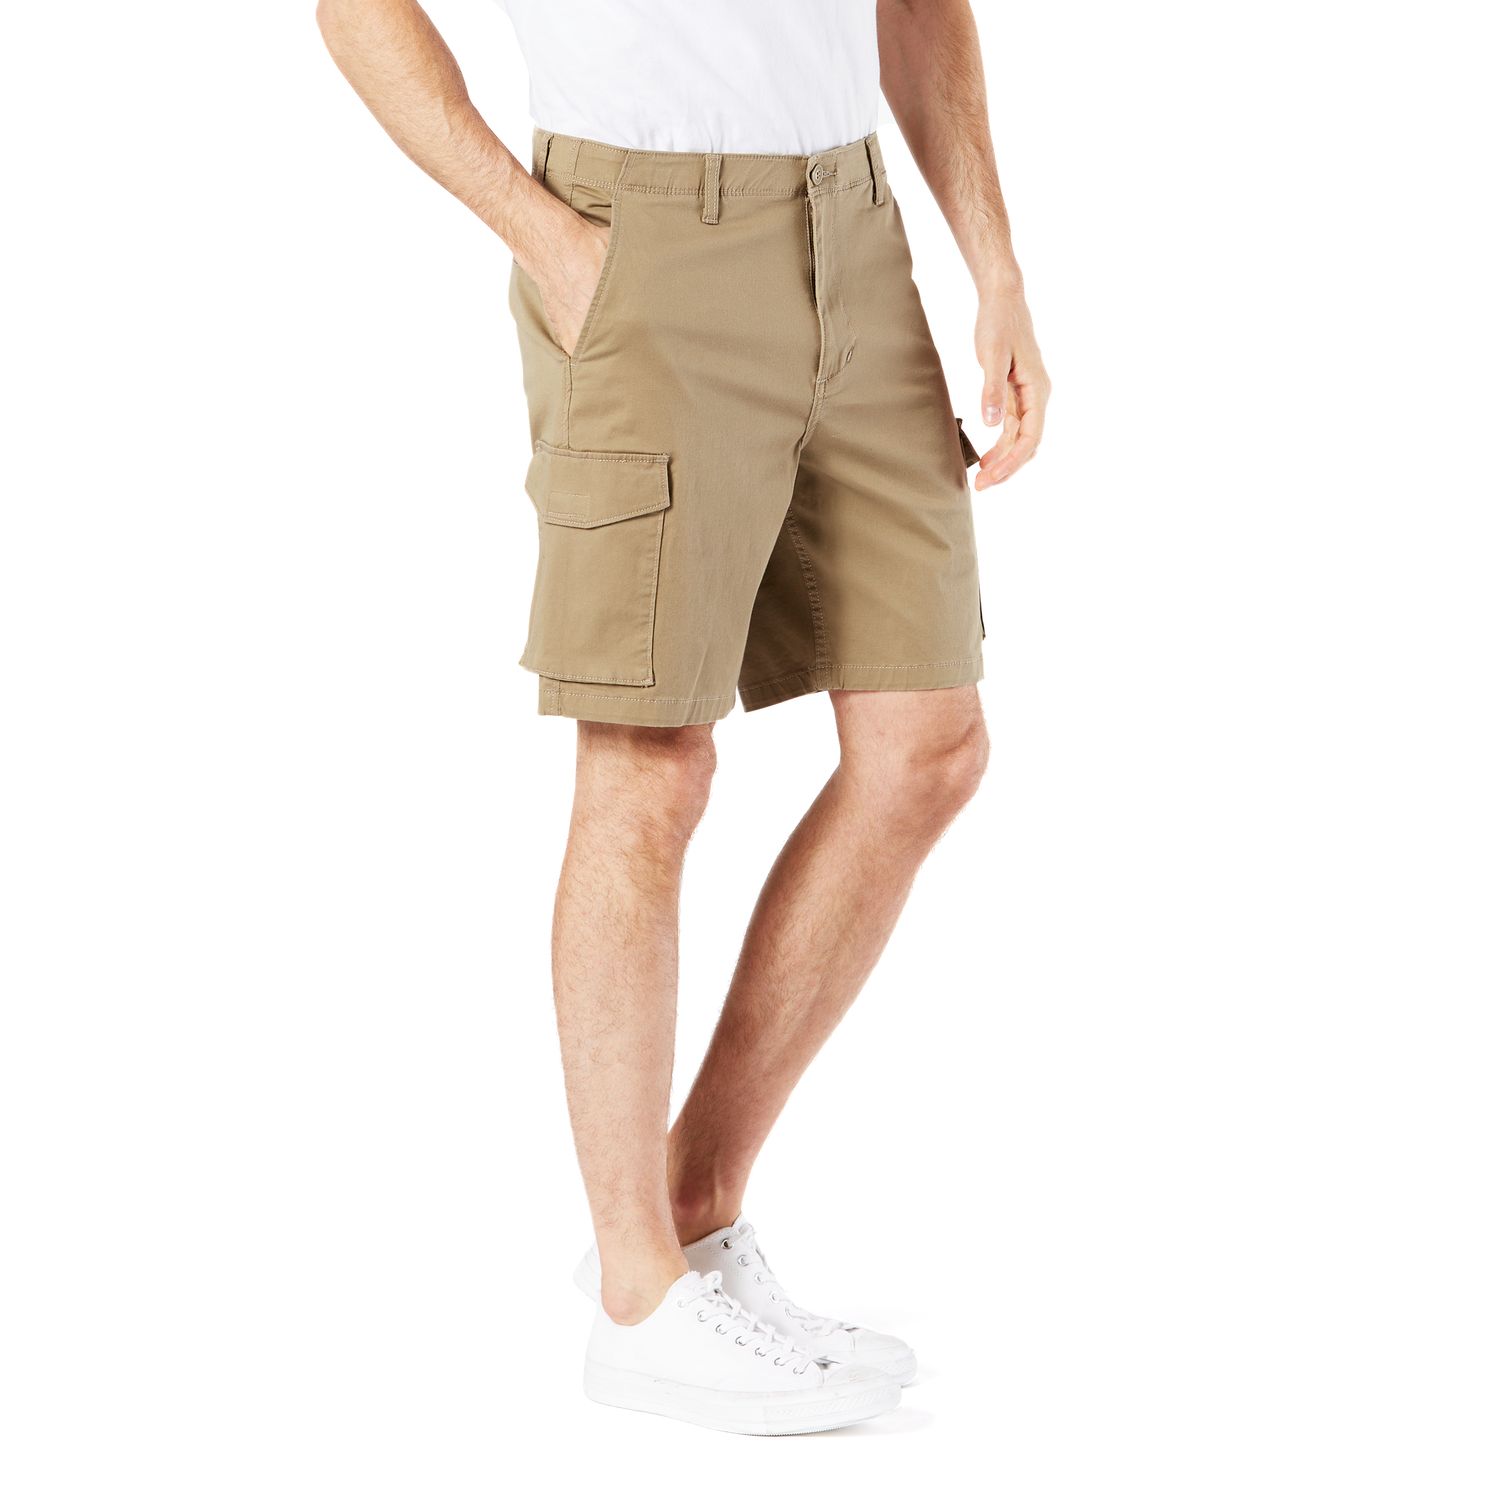 dockers cargo shorts classic fit